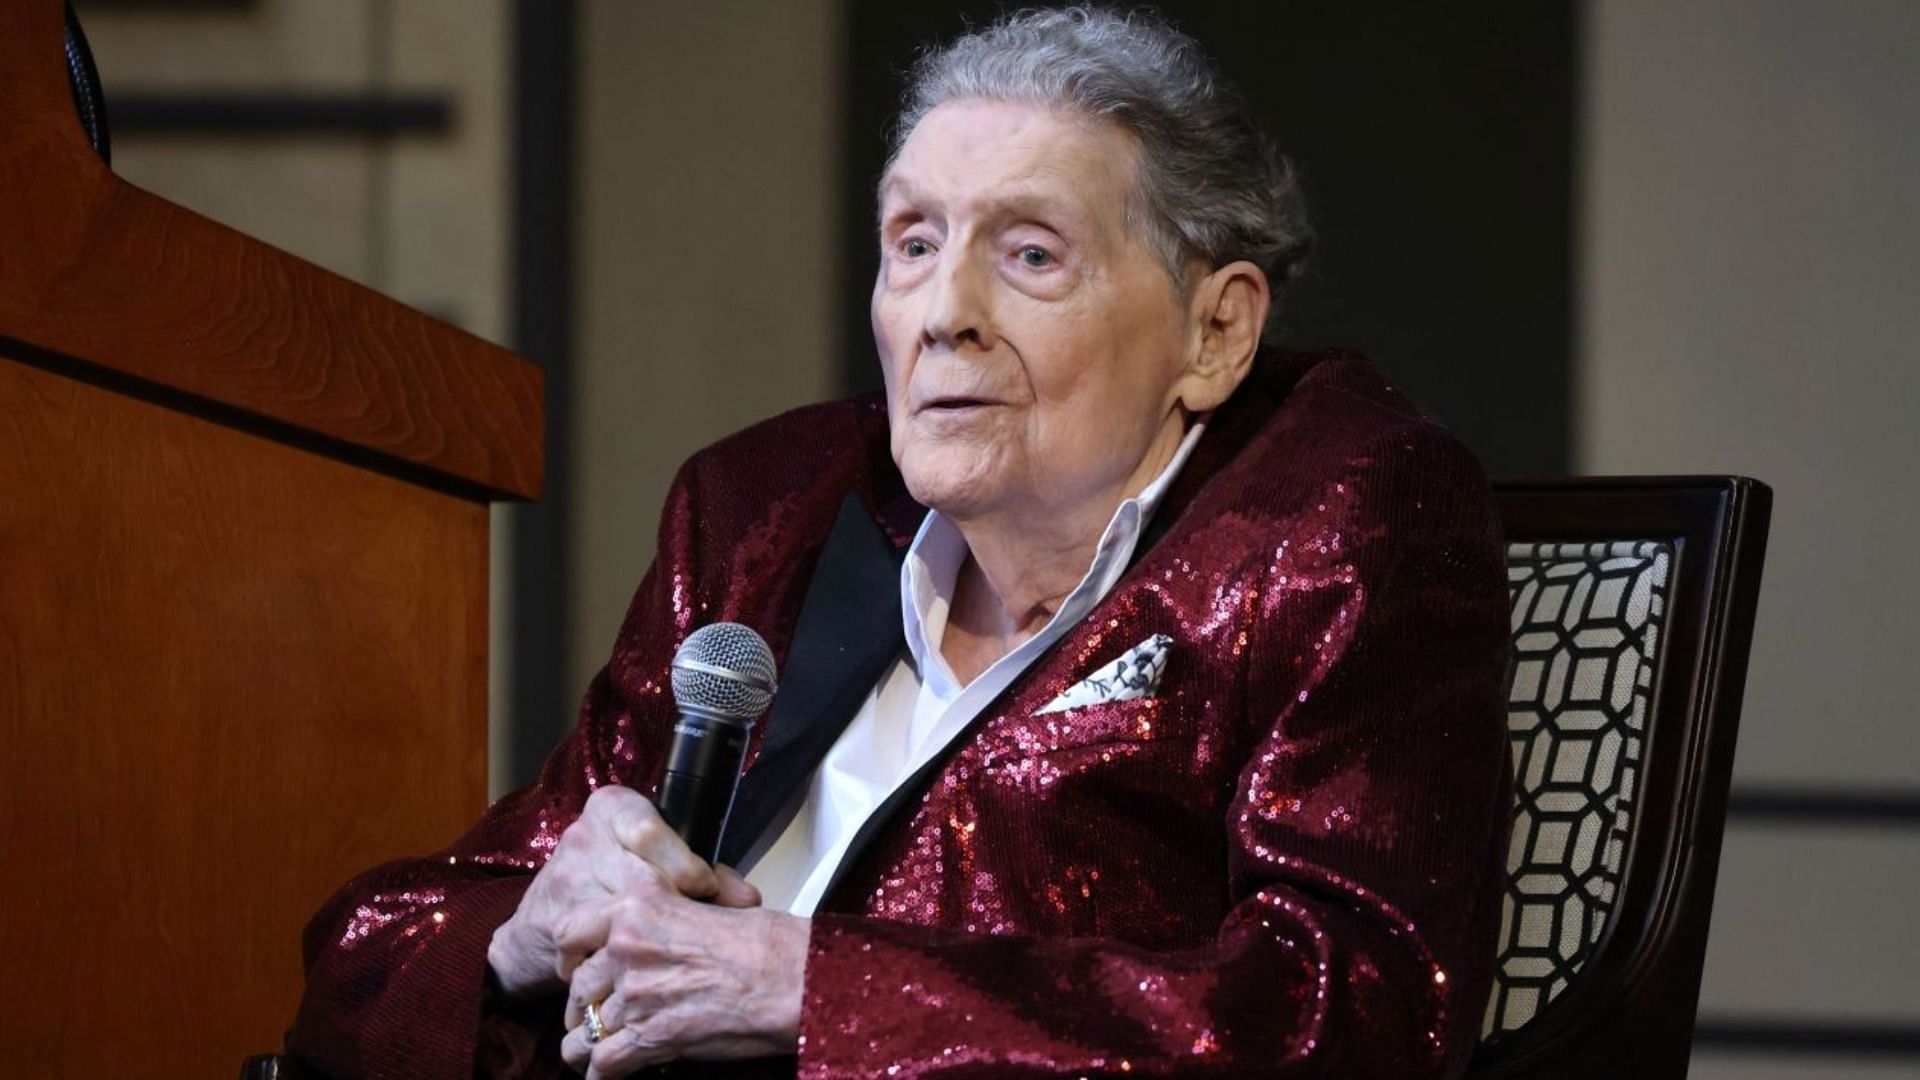 Jerry Lee Lewis has died at the age of 87. (Image via Jason Kempin / Getty)